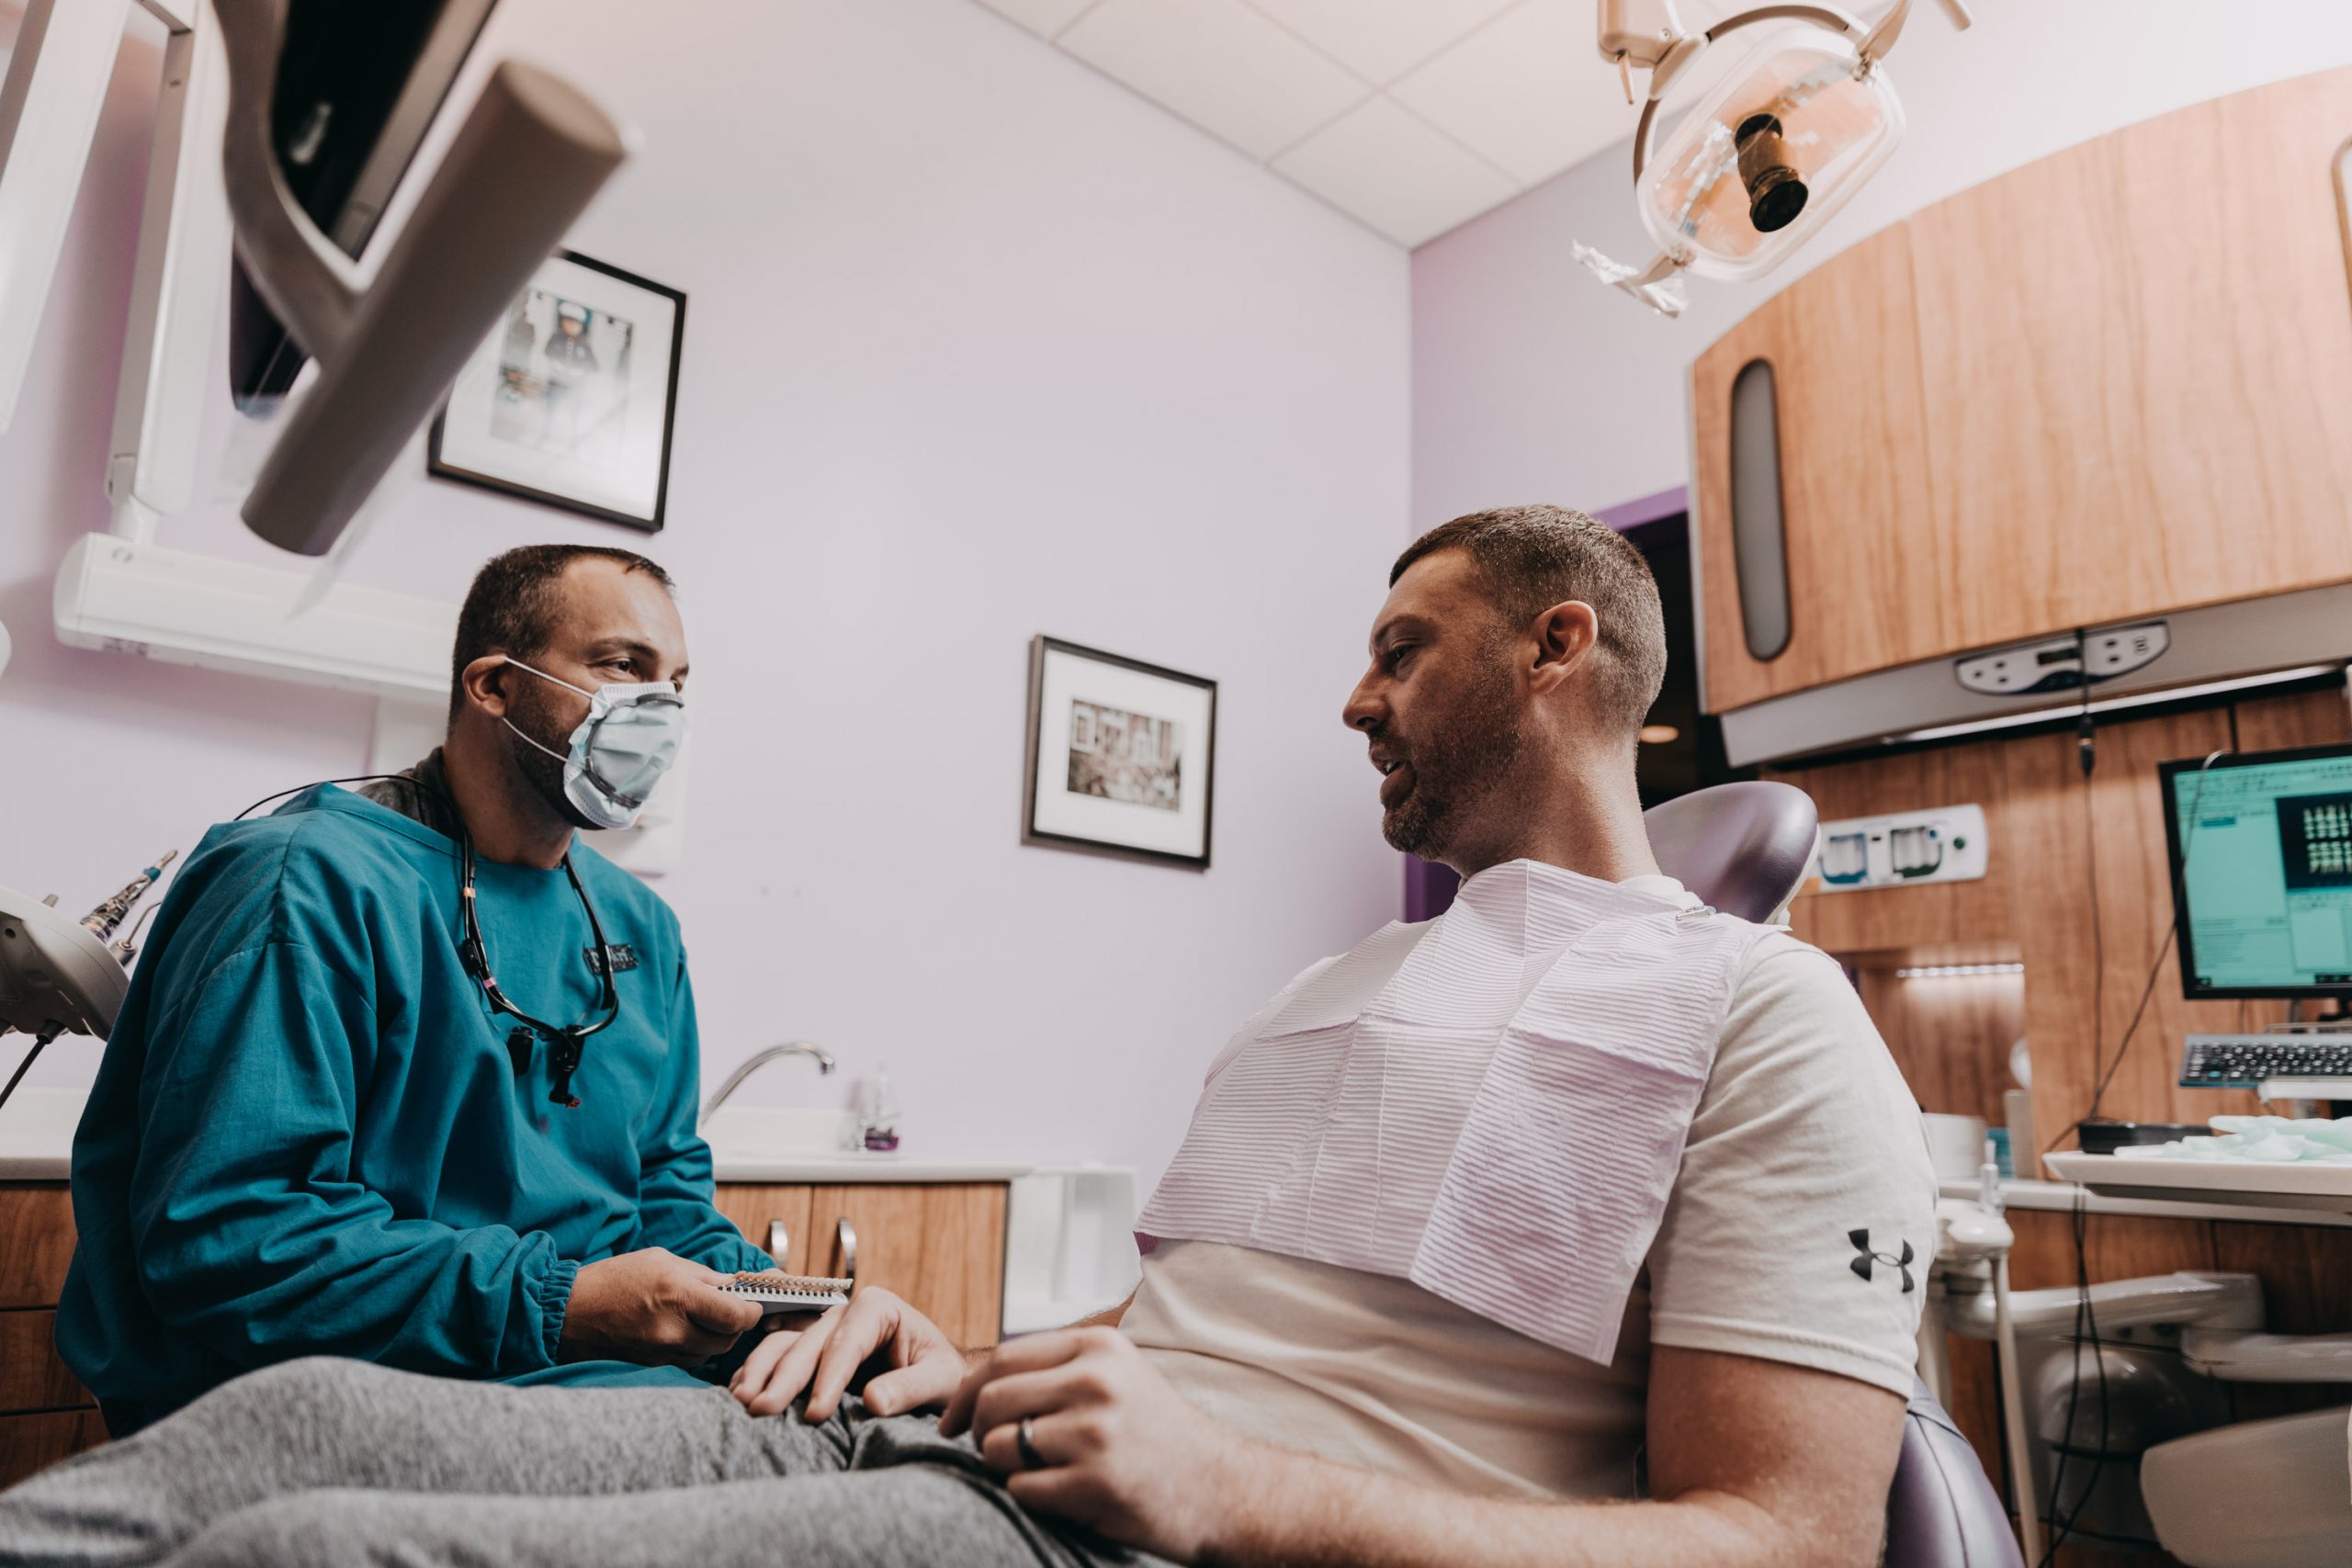  Male dentist wearing facemask and personal protective equipment (PPE) talks to male patient during dentist appointment.